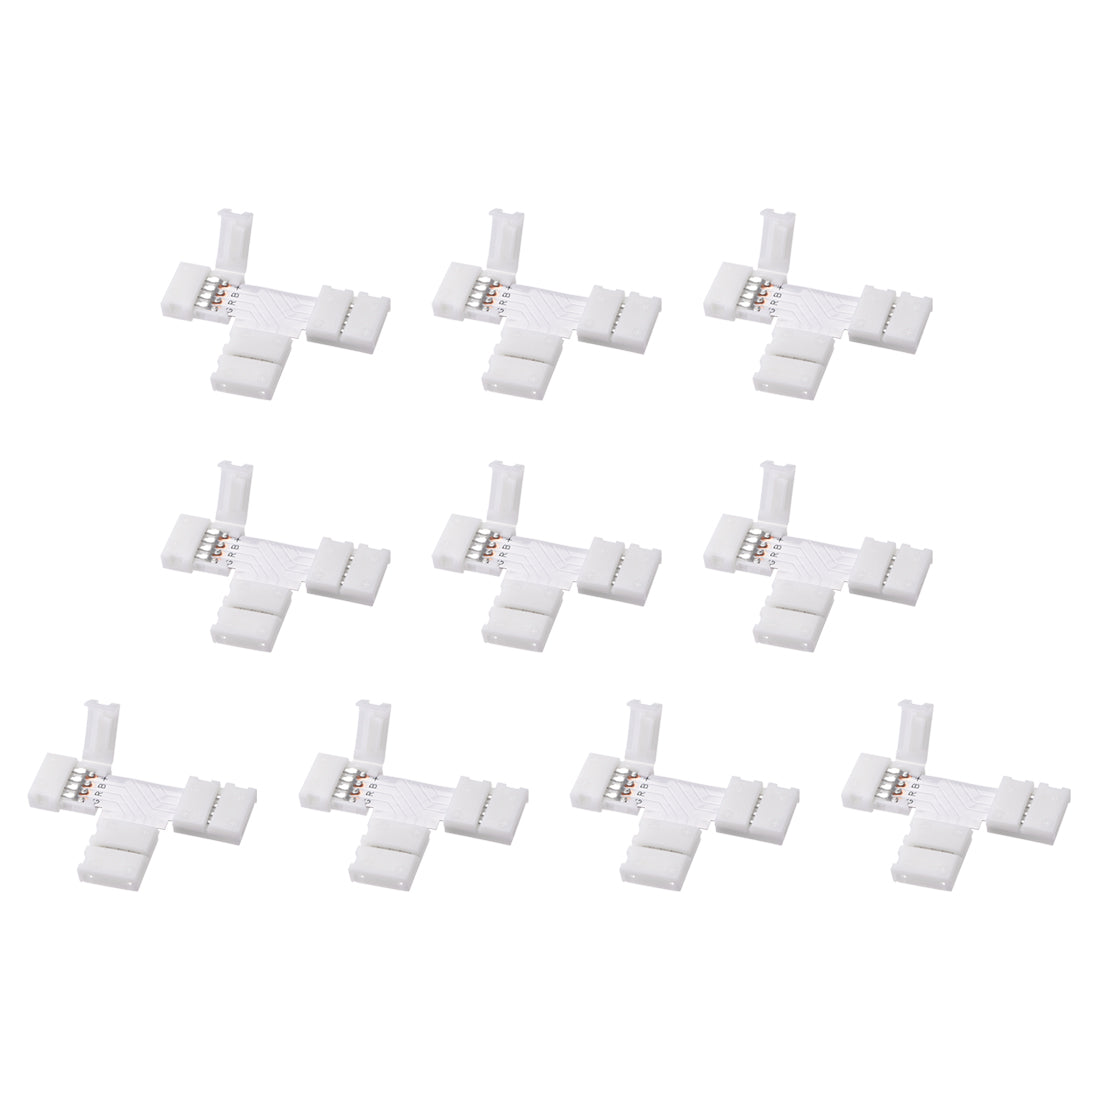 Uxcell Uxcell 10mm 4P T-shape LED Strip Connector Quick Splitter for 5050 RGB 4 Conductor Strip Lights 10Pcs